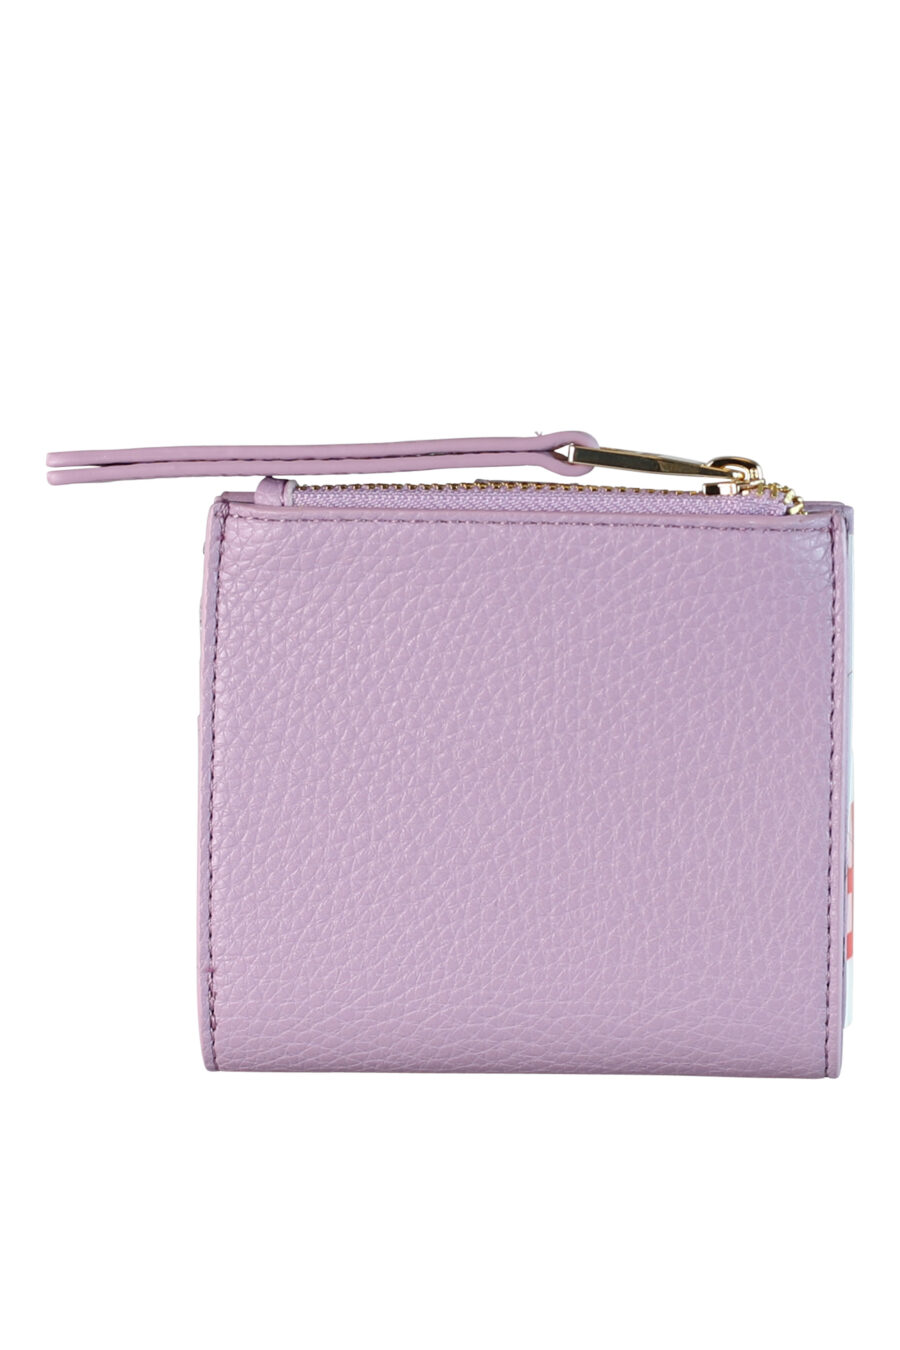 Lilac wallet with baroque buckle - IMG 0488